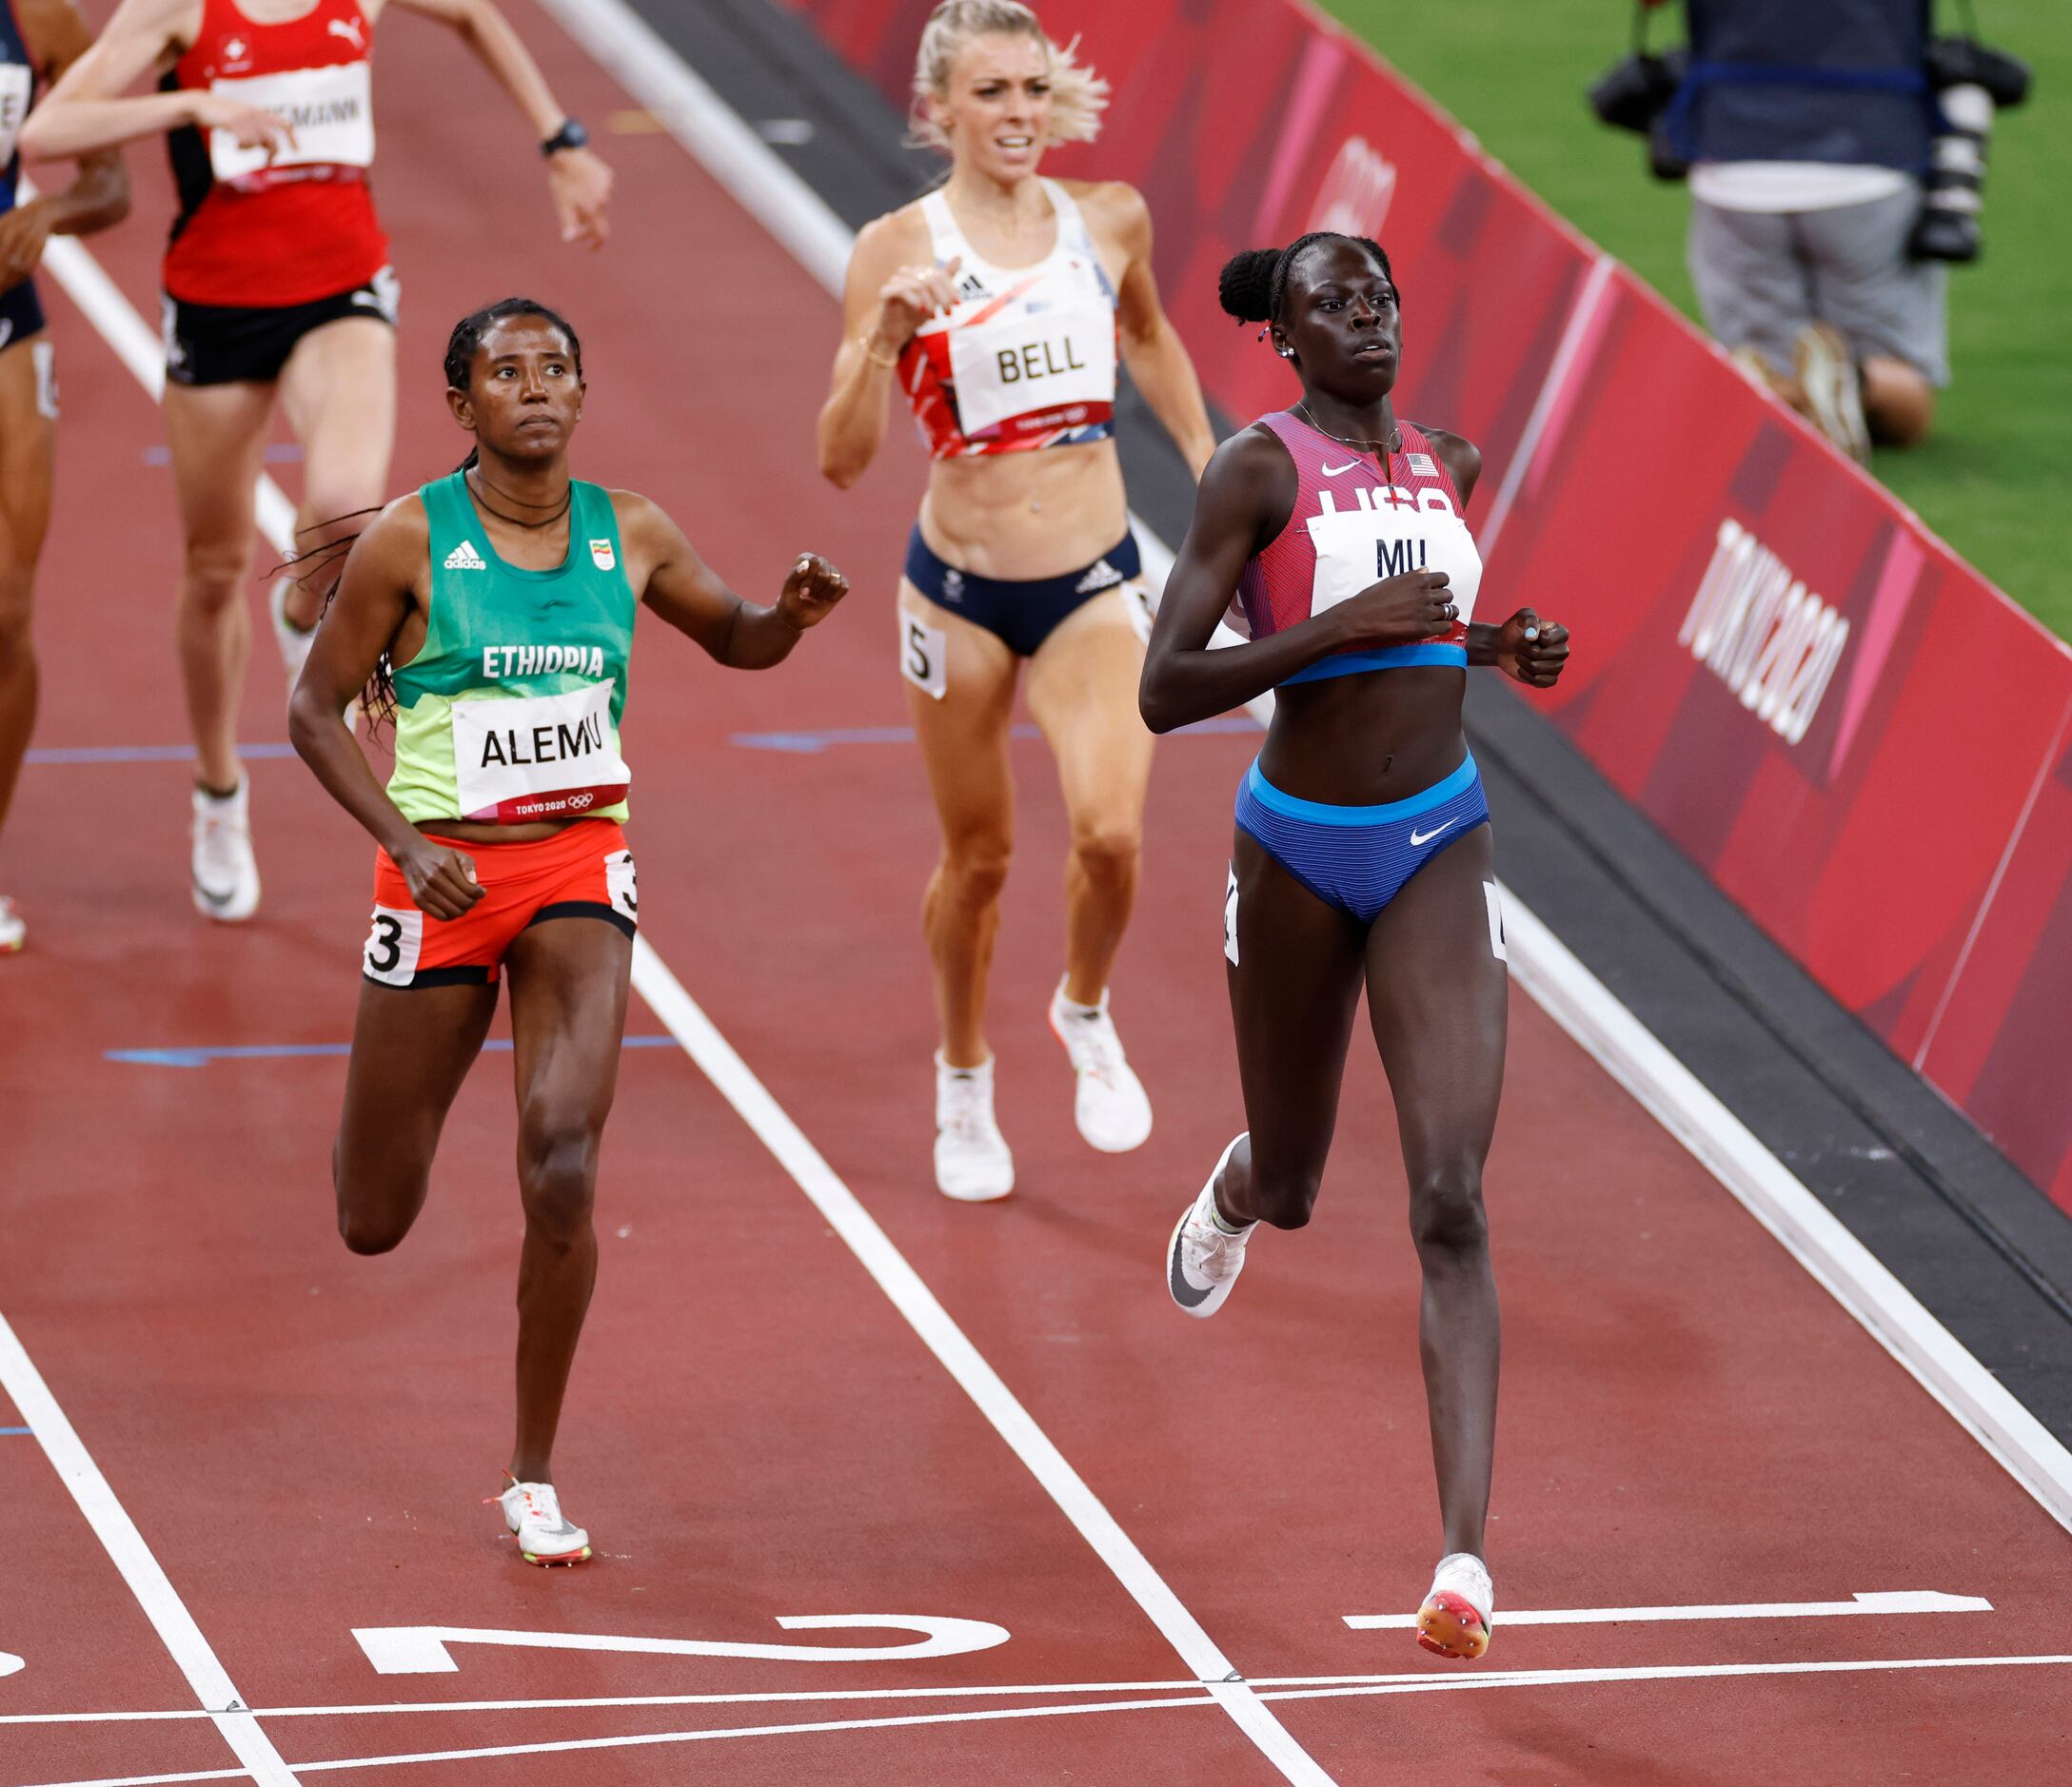 USA’s Athing Mu leads the way in front of Ethiopia’s Habitam Alemu as she competes in the...